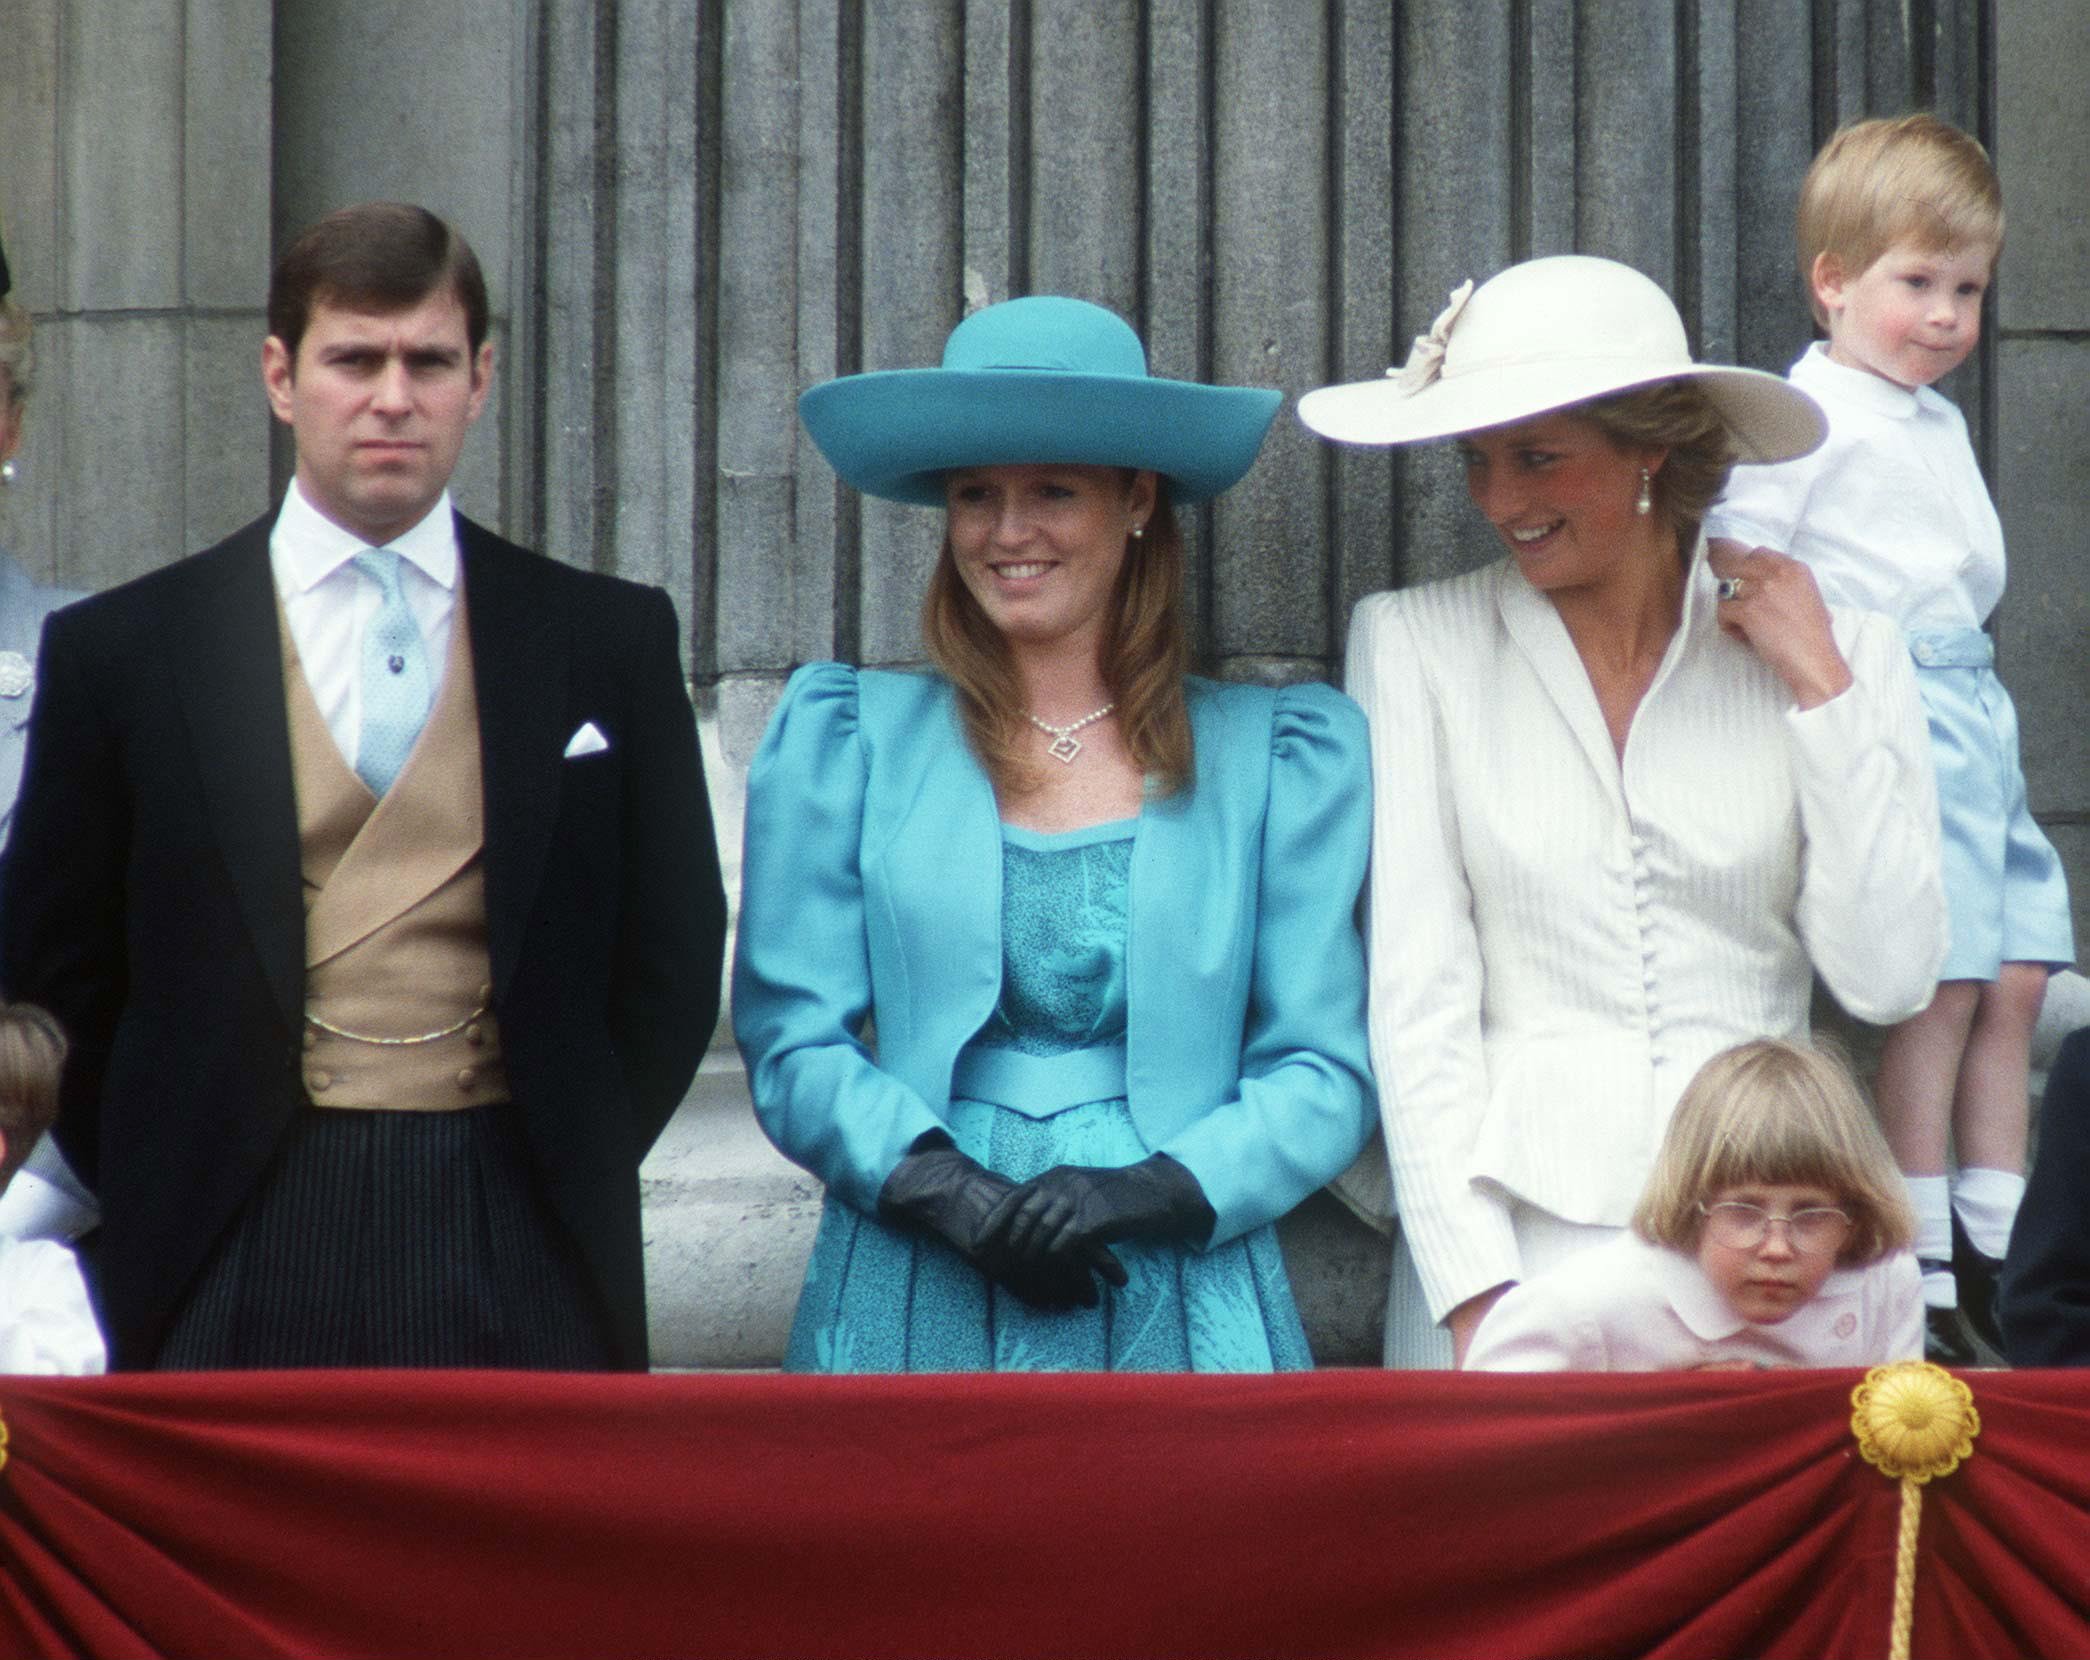 Prince Andrew, Sarah Ferguson, Princess Diana and her son Prince Harry on the balcony of Buckingham Palace for Trooping the Color in London, United Kingdom. | Source: Getty Images